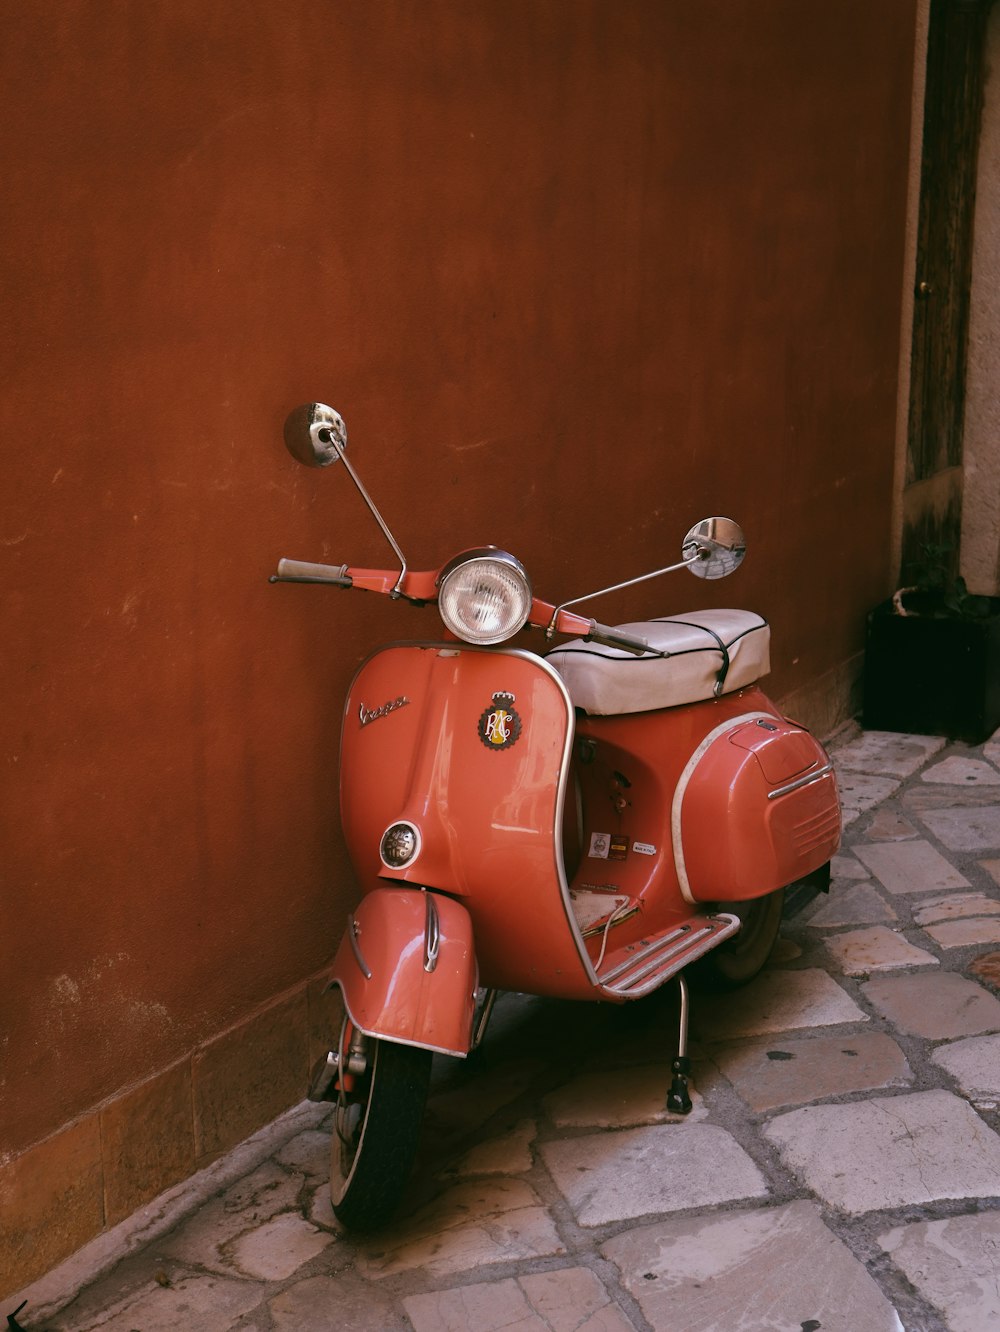 a red scooter parked on a brick sidewalk